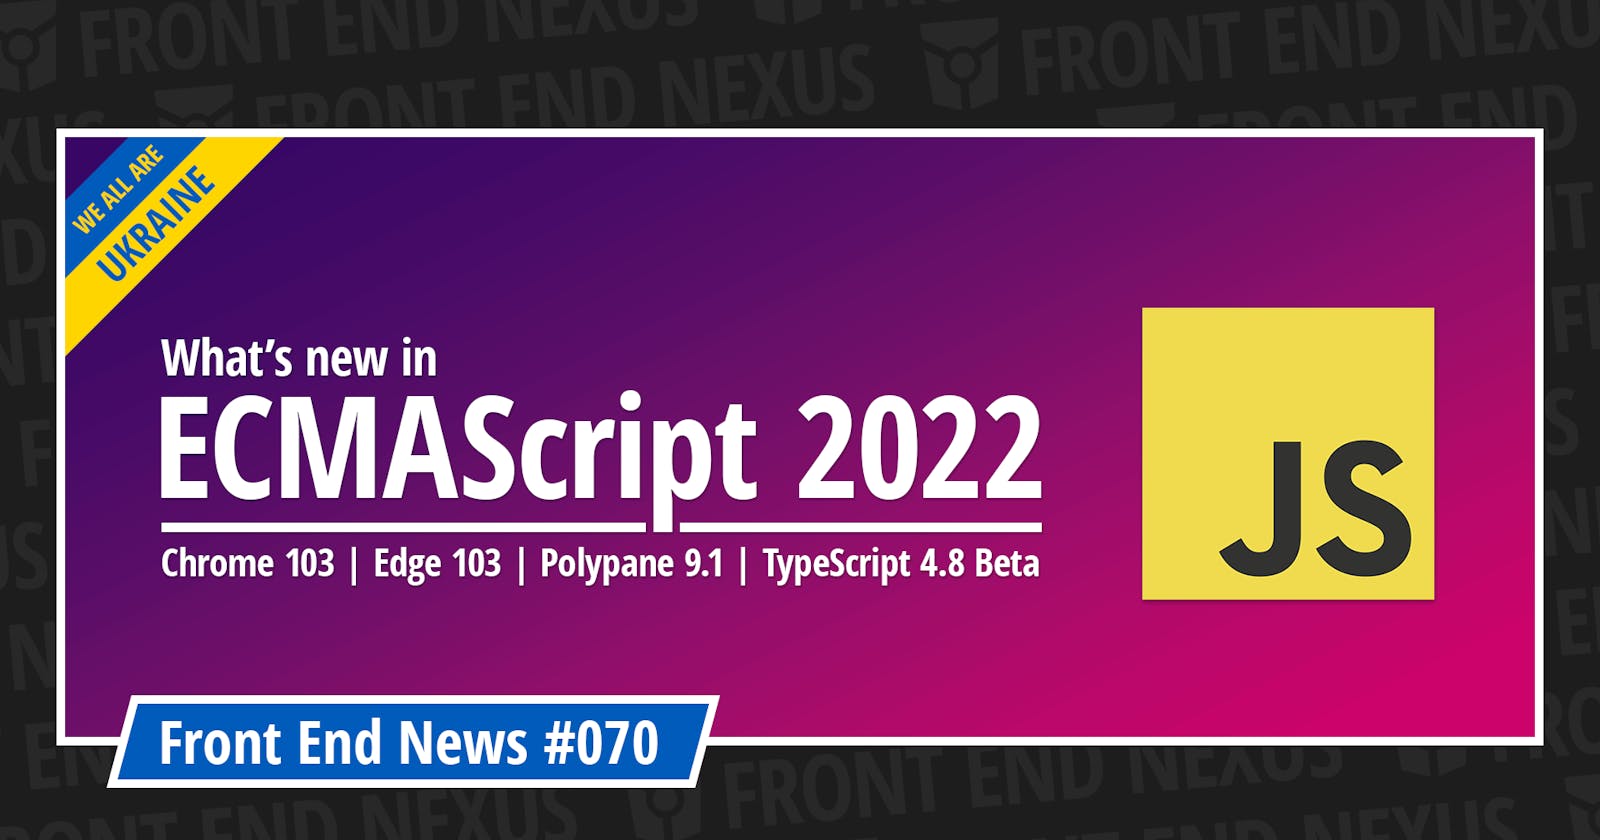 What’s new in ECMAScript 2022, Chrome 103, Edge 103, Polypane 9.1, TypeScript 4.8 Beta, and more | Front End News #070